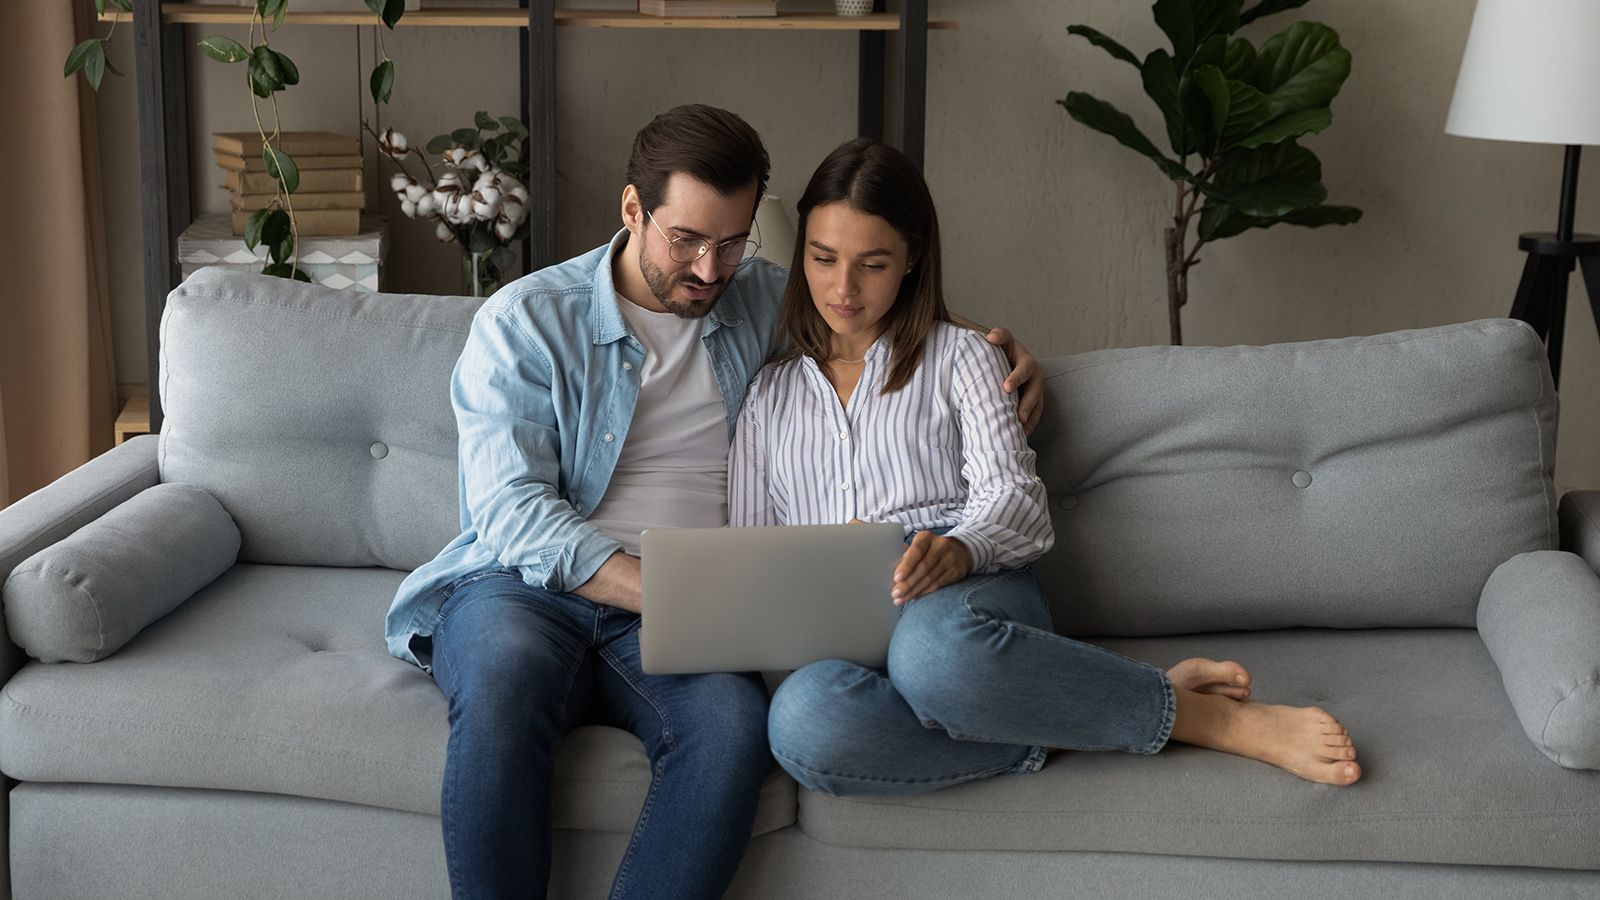 Serious young couple sit on sofa by laptop consider on making expensive purchase discuss wedding planning. Loving millennial spouses surf internet together search for new house apartment to buy rent